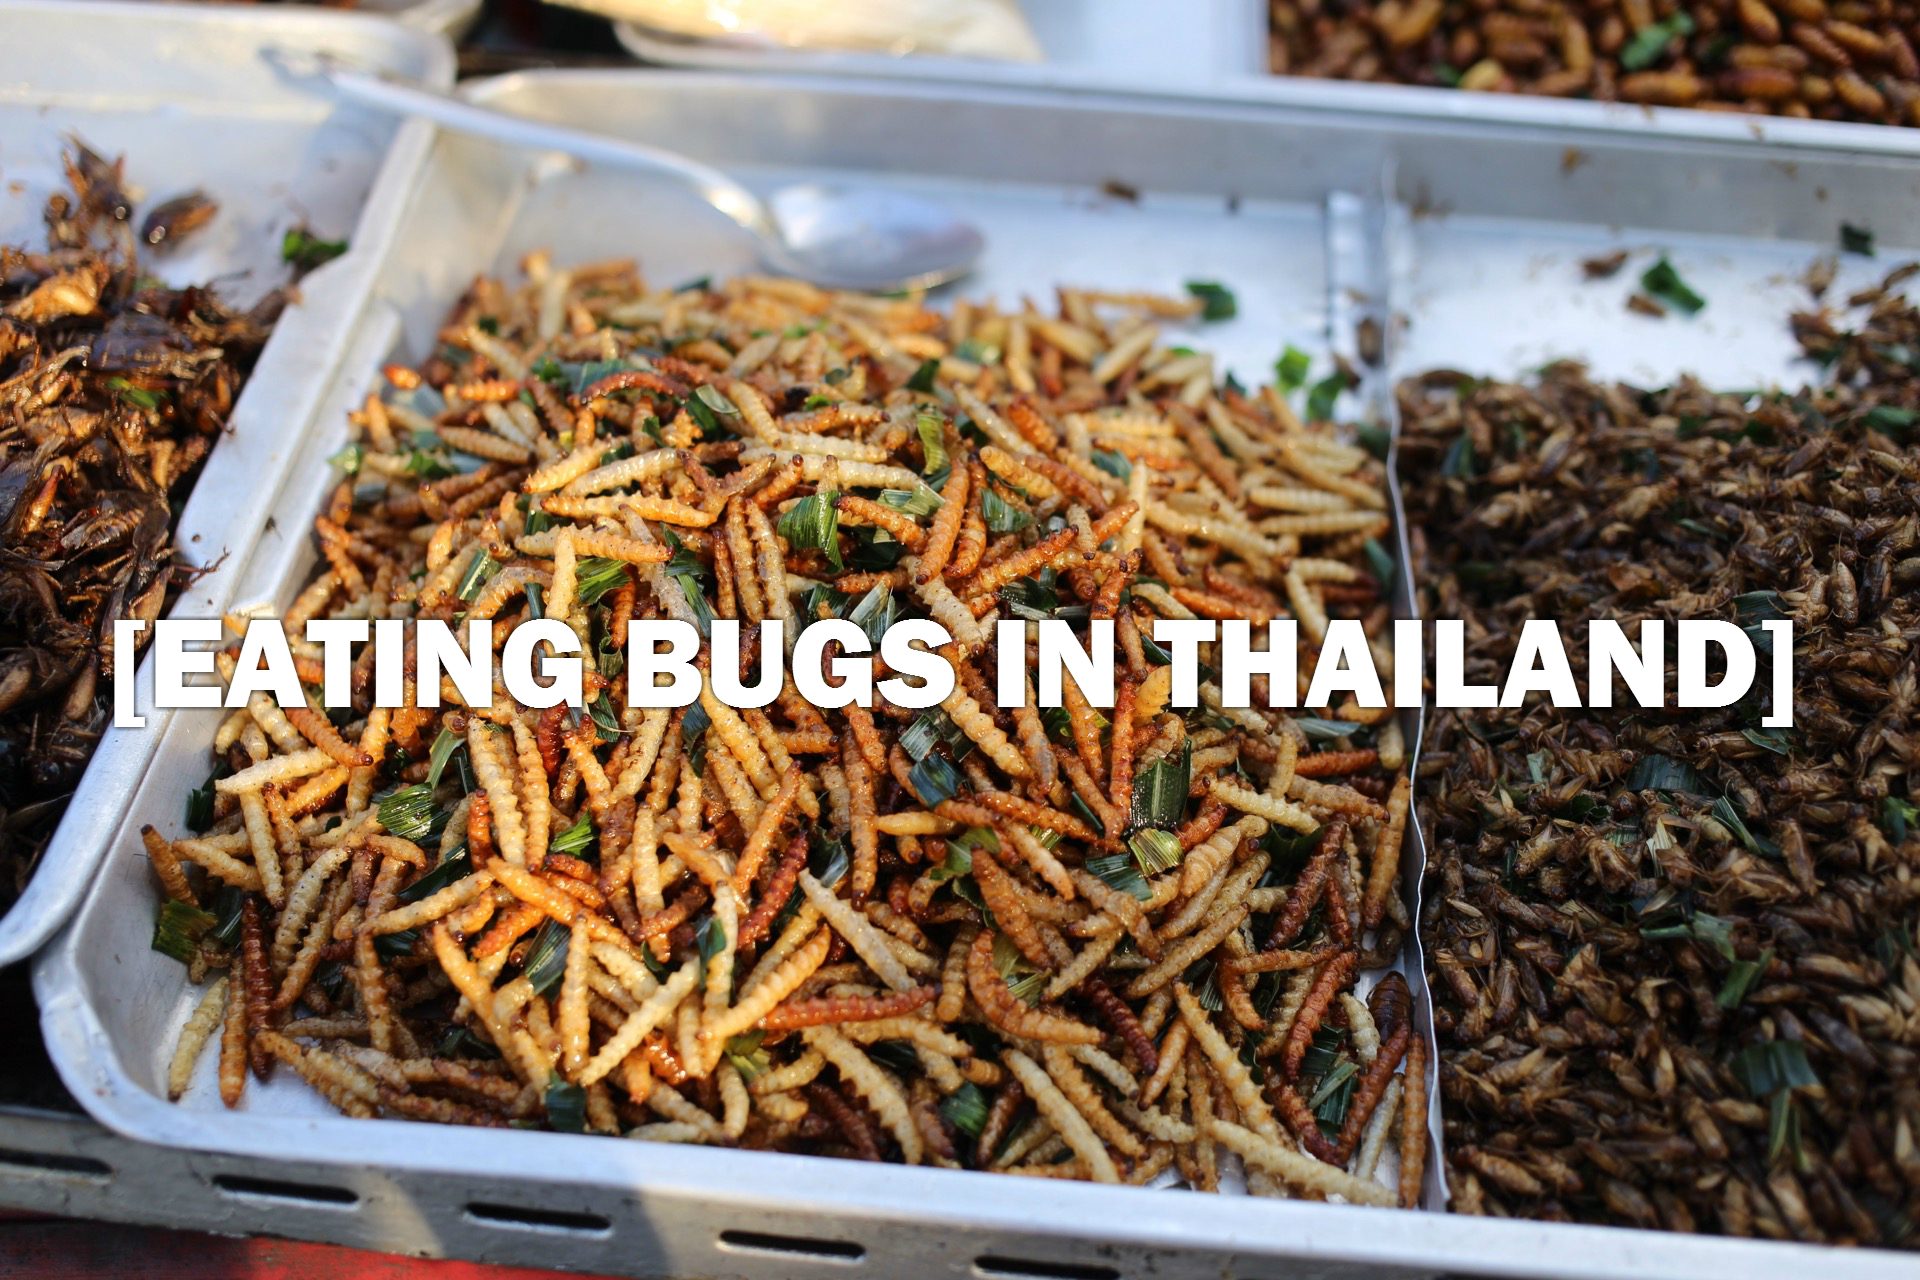 Bugs in Thailand